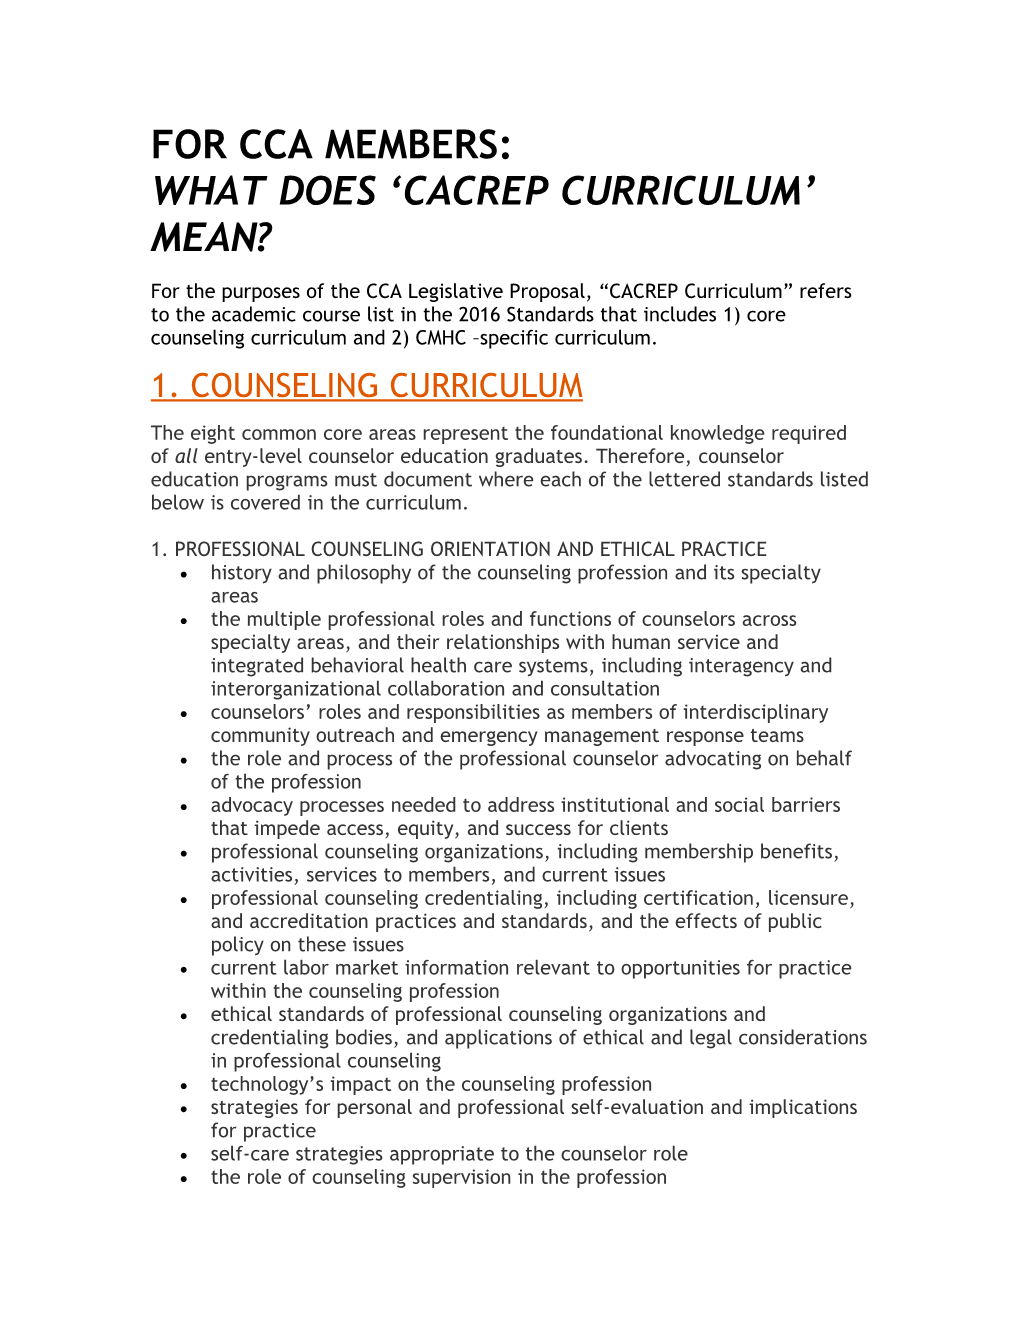 What Does Cacrep Curriculum Mean?